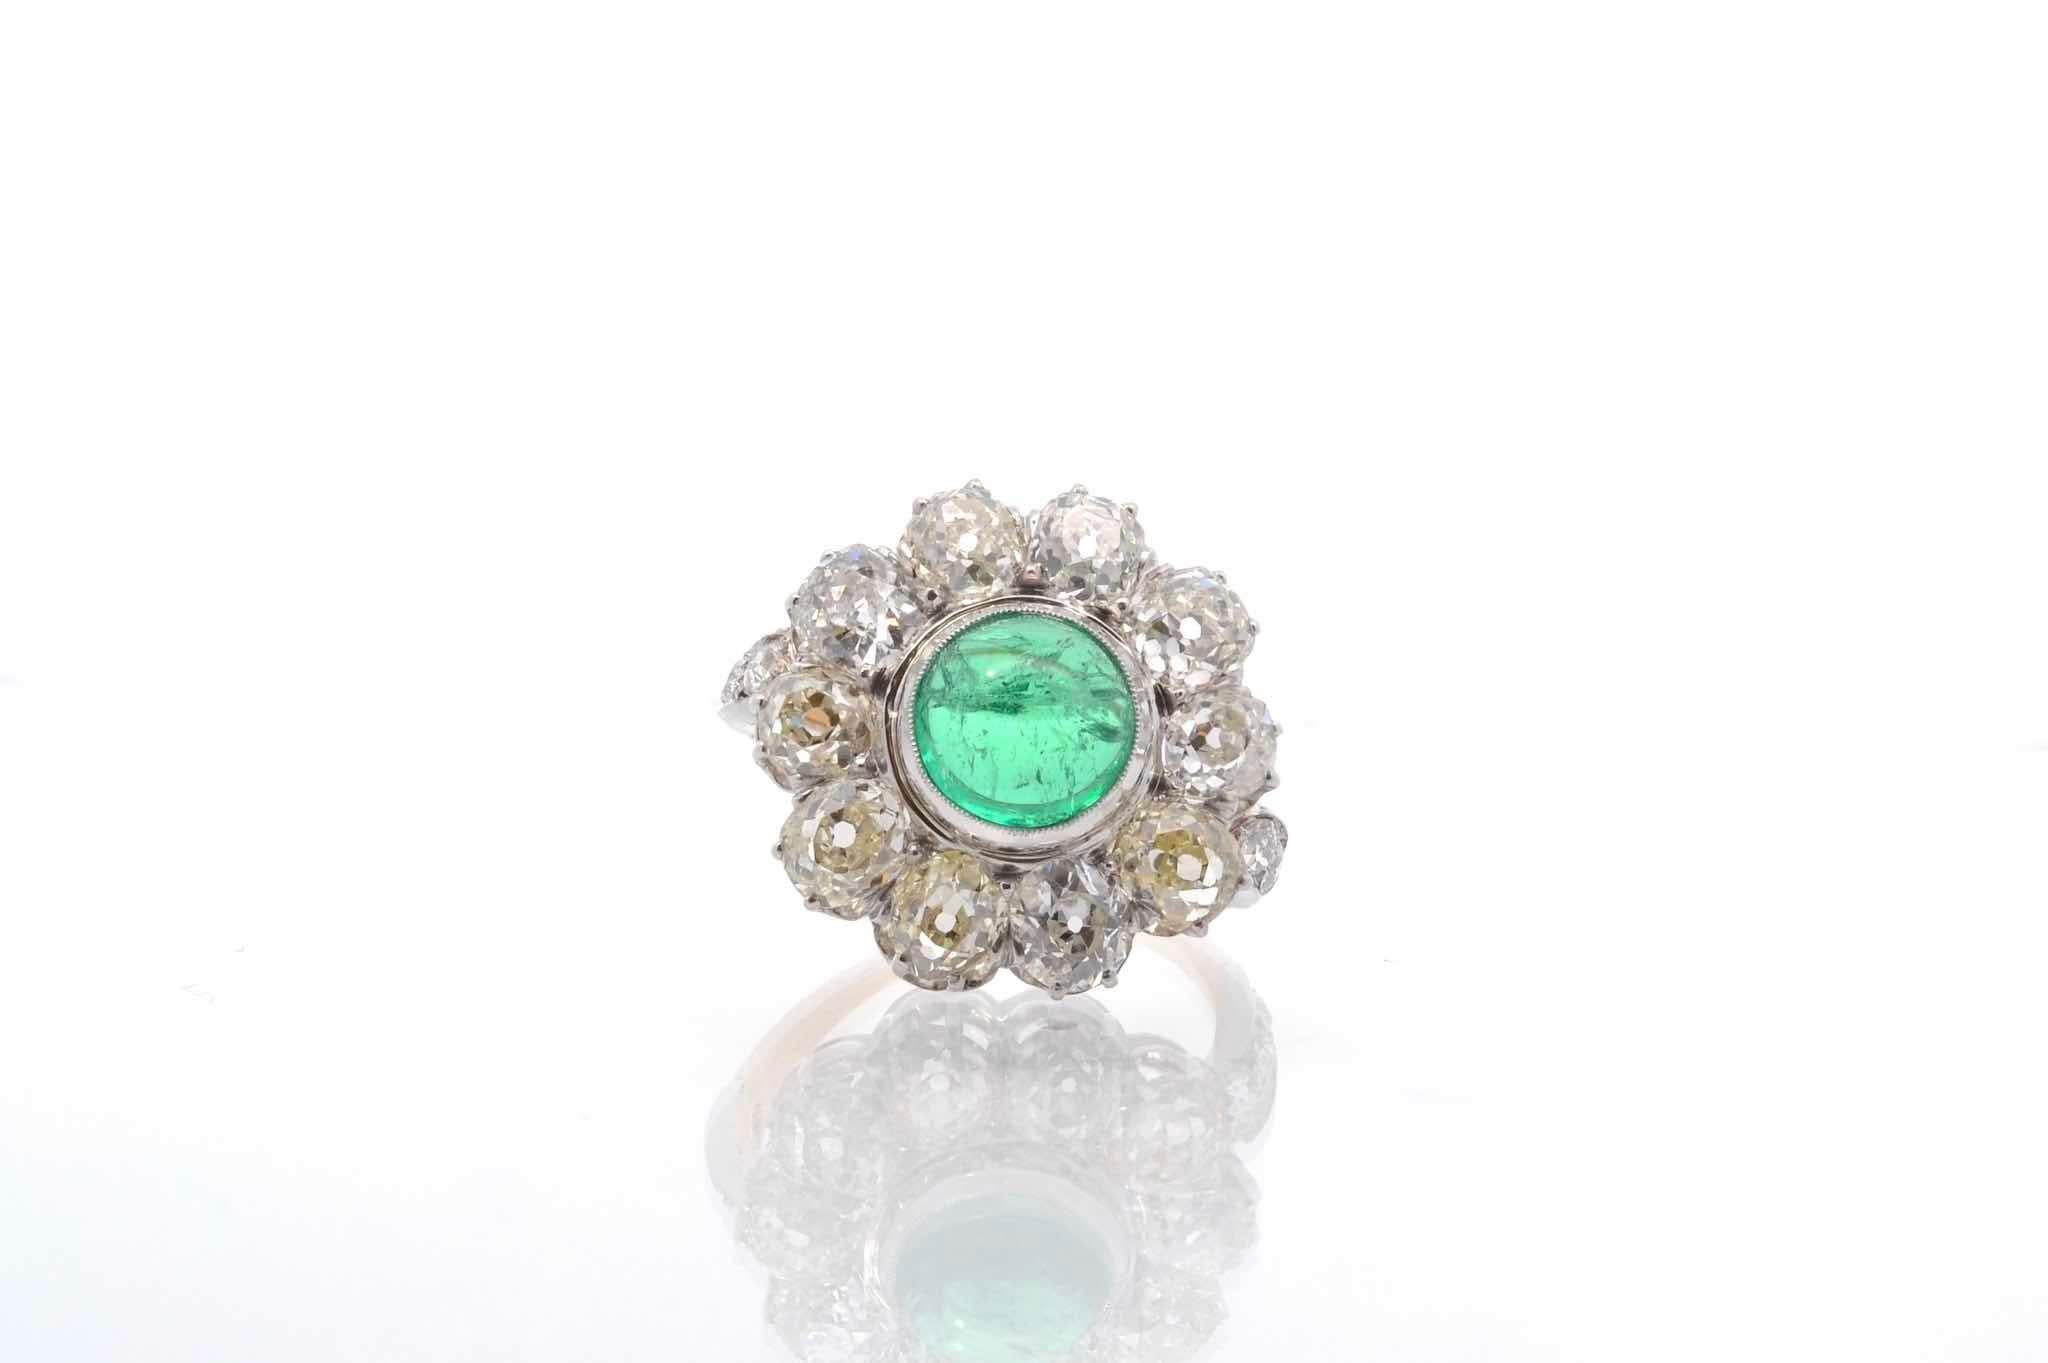 Stones: Colombian cabochon emerald of 2.94 cts and 10 diamonds of 4.50 cts.
Material: 18k yellow gold and platinum
Weight: 8.7g
Period: 1900
Size: 51 (free sizing)
Certificate
Ref. : 24464-25440